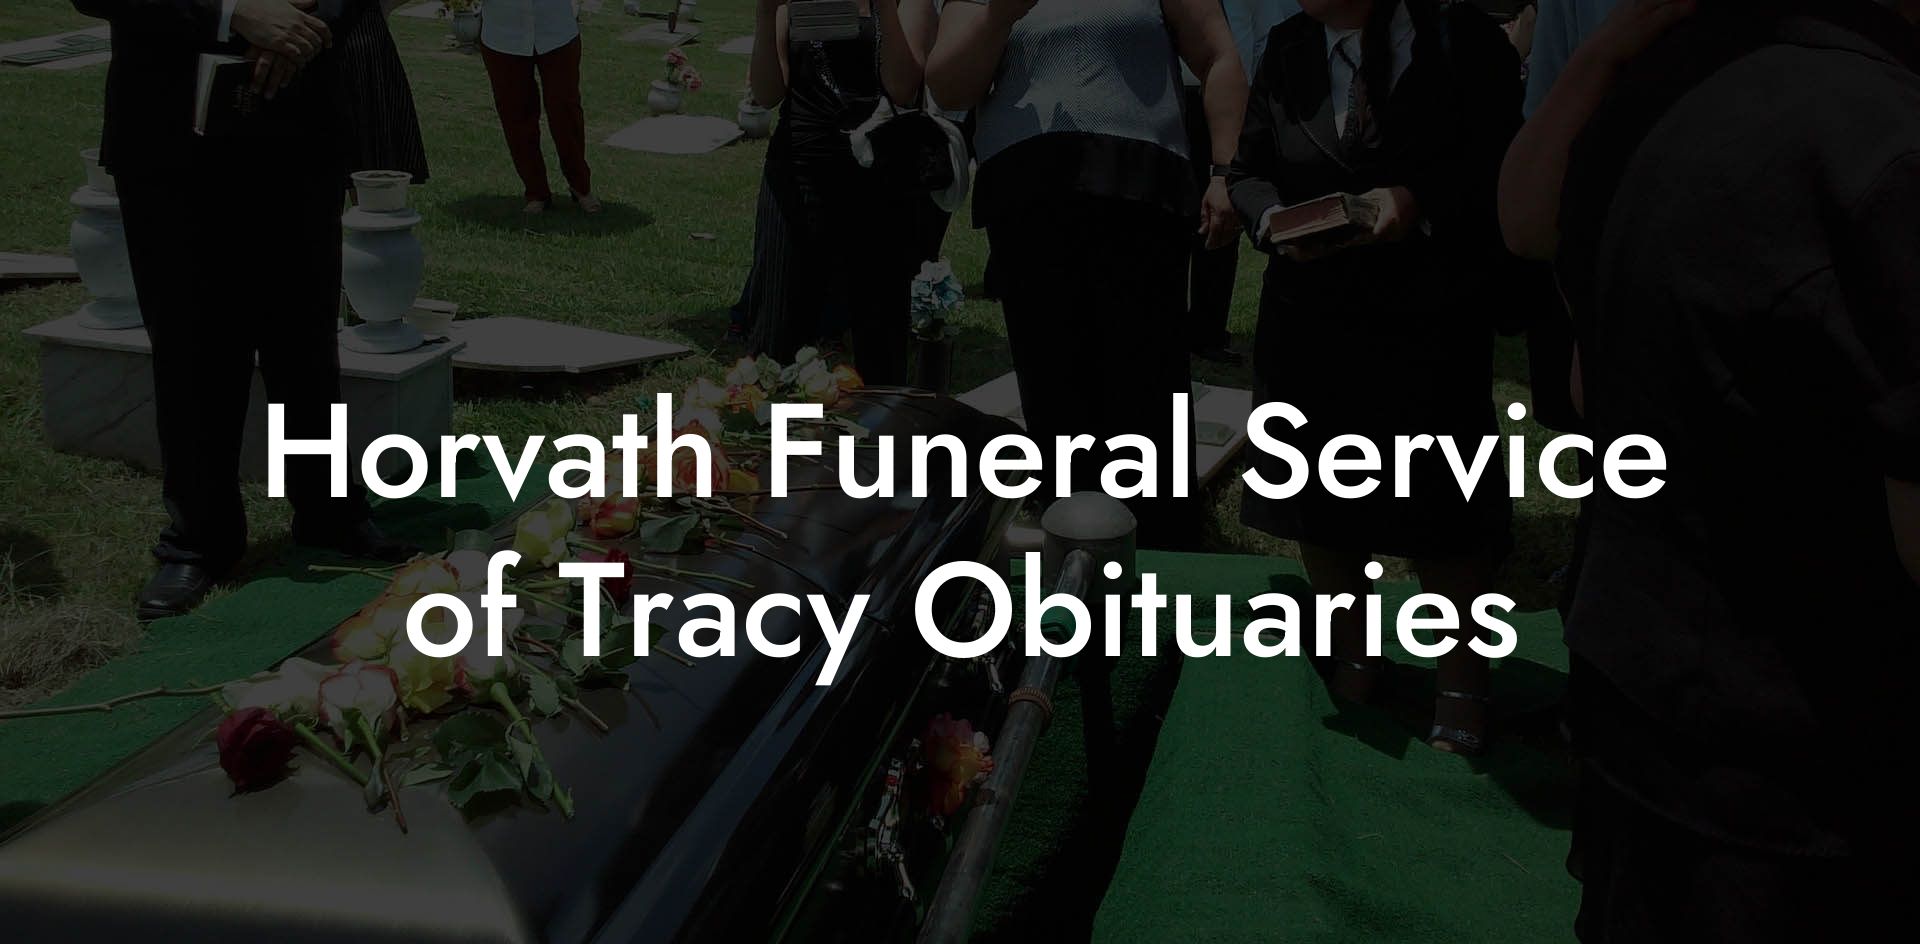 Horvath Funeral Service of Tracy Obituaries